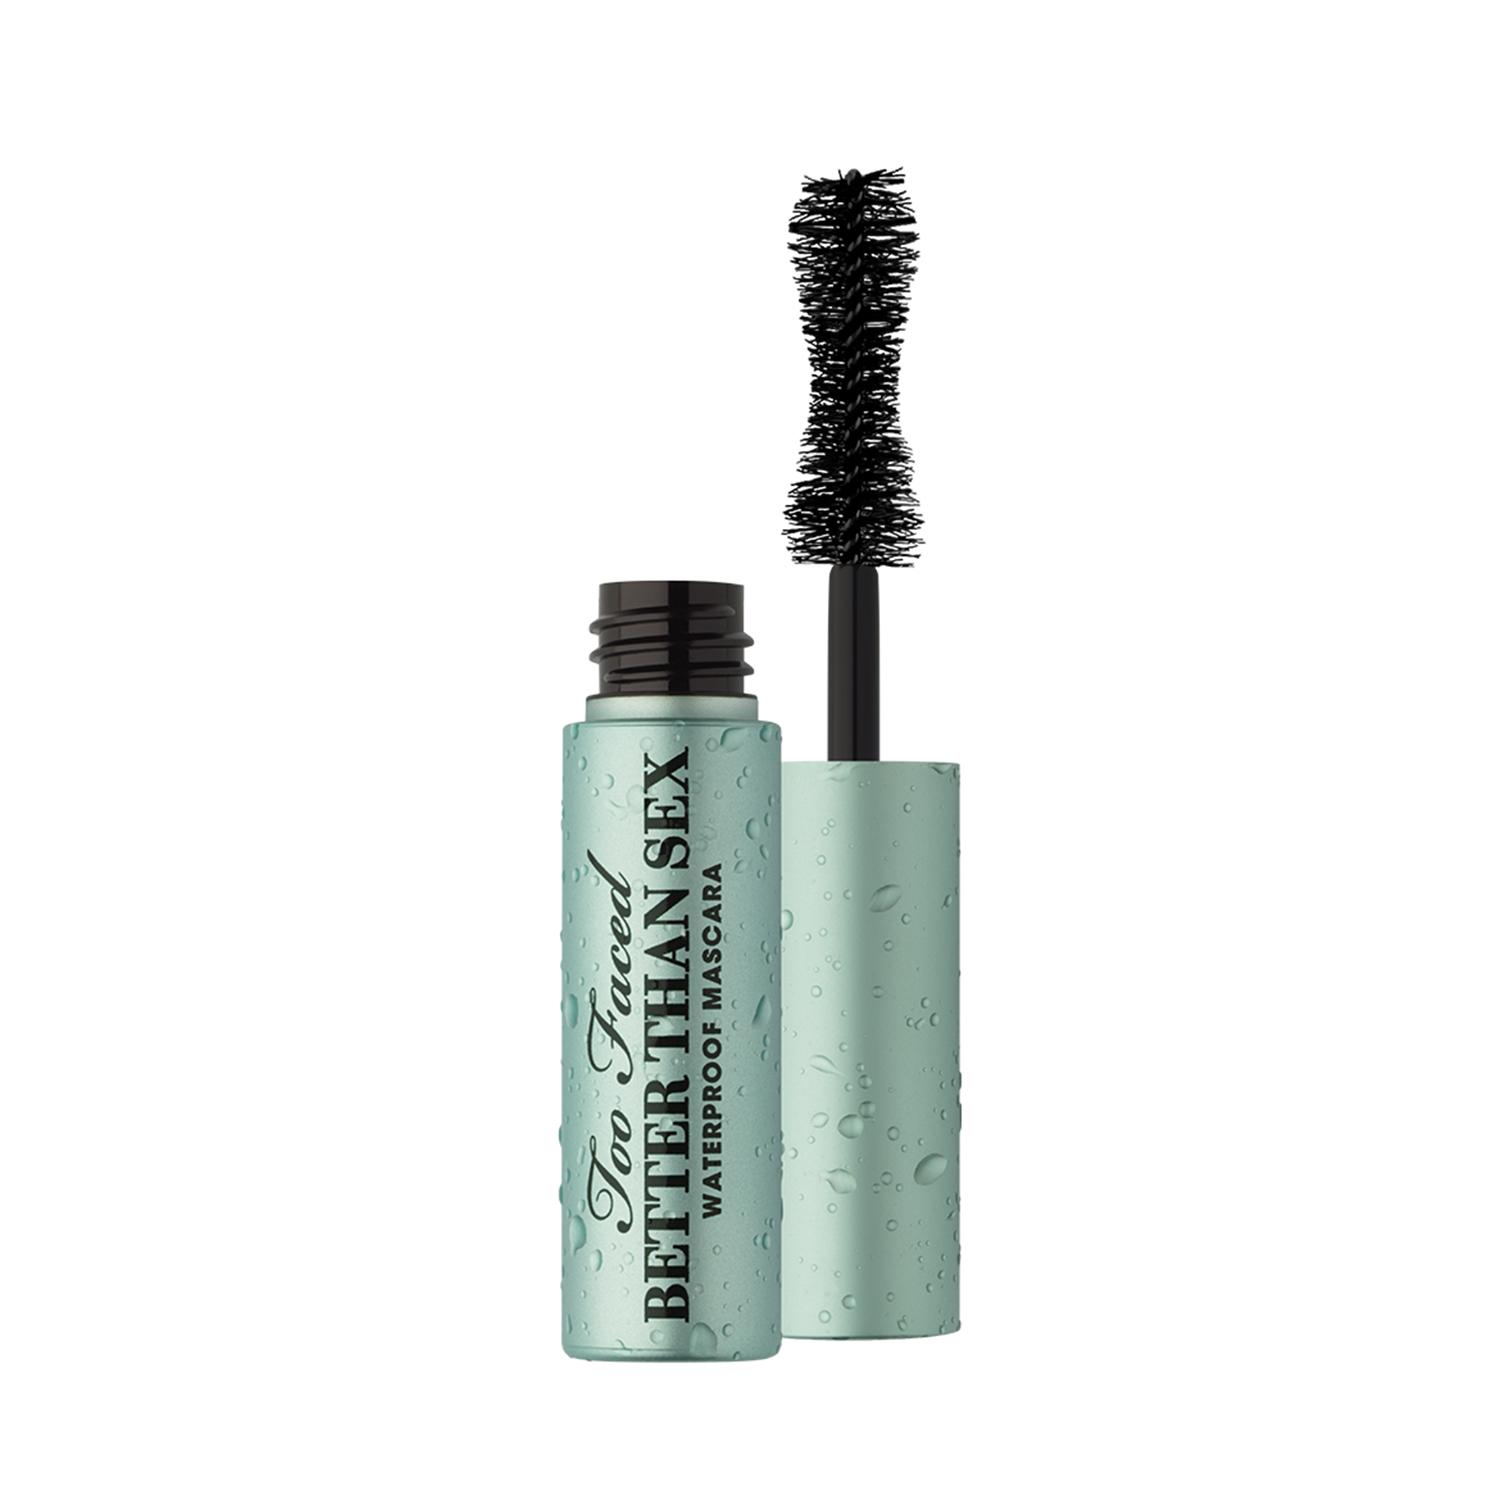 Too Faced | Too Faced Travel Size Better Than Sex Waterproof Mascara - Black (4.8g)